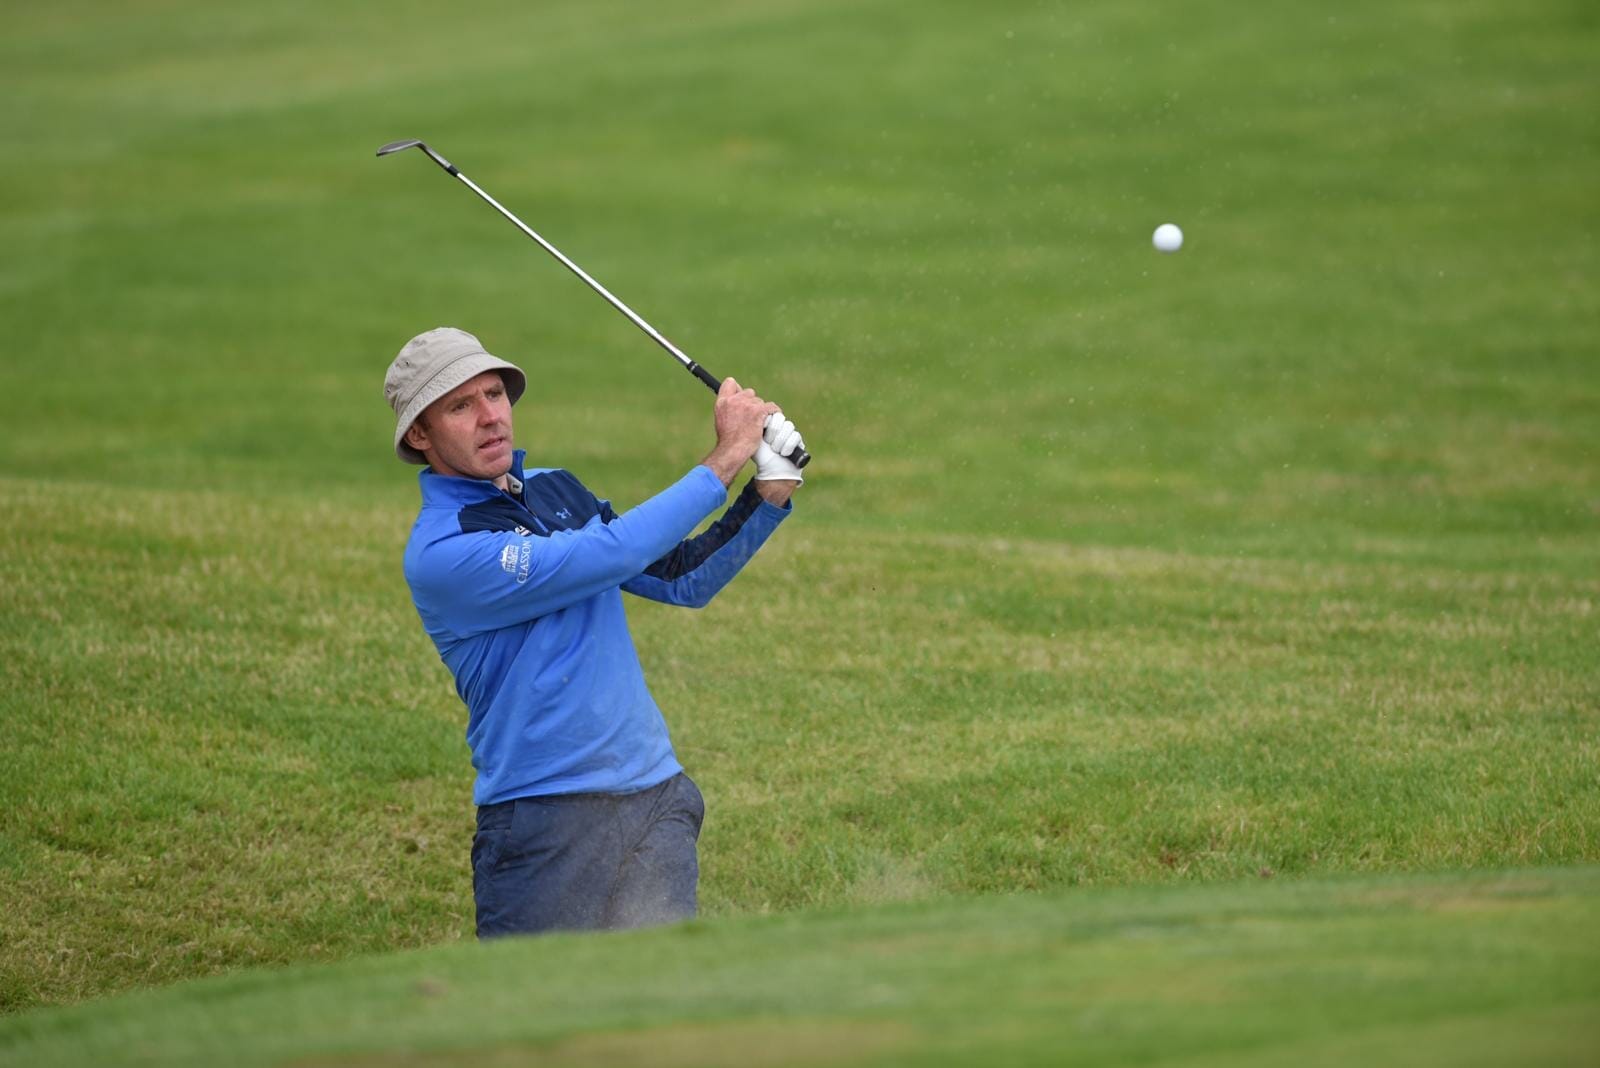 Moriarty’s hot-streak continues at Cairndhu Pro-Am